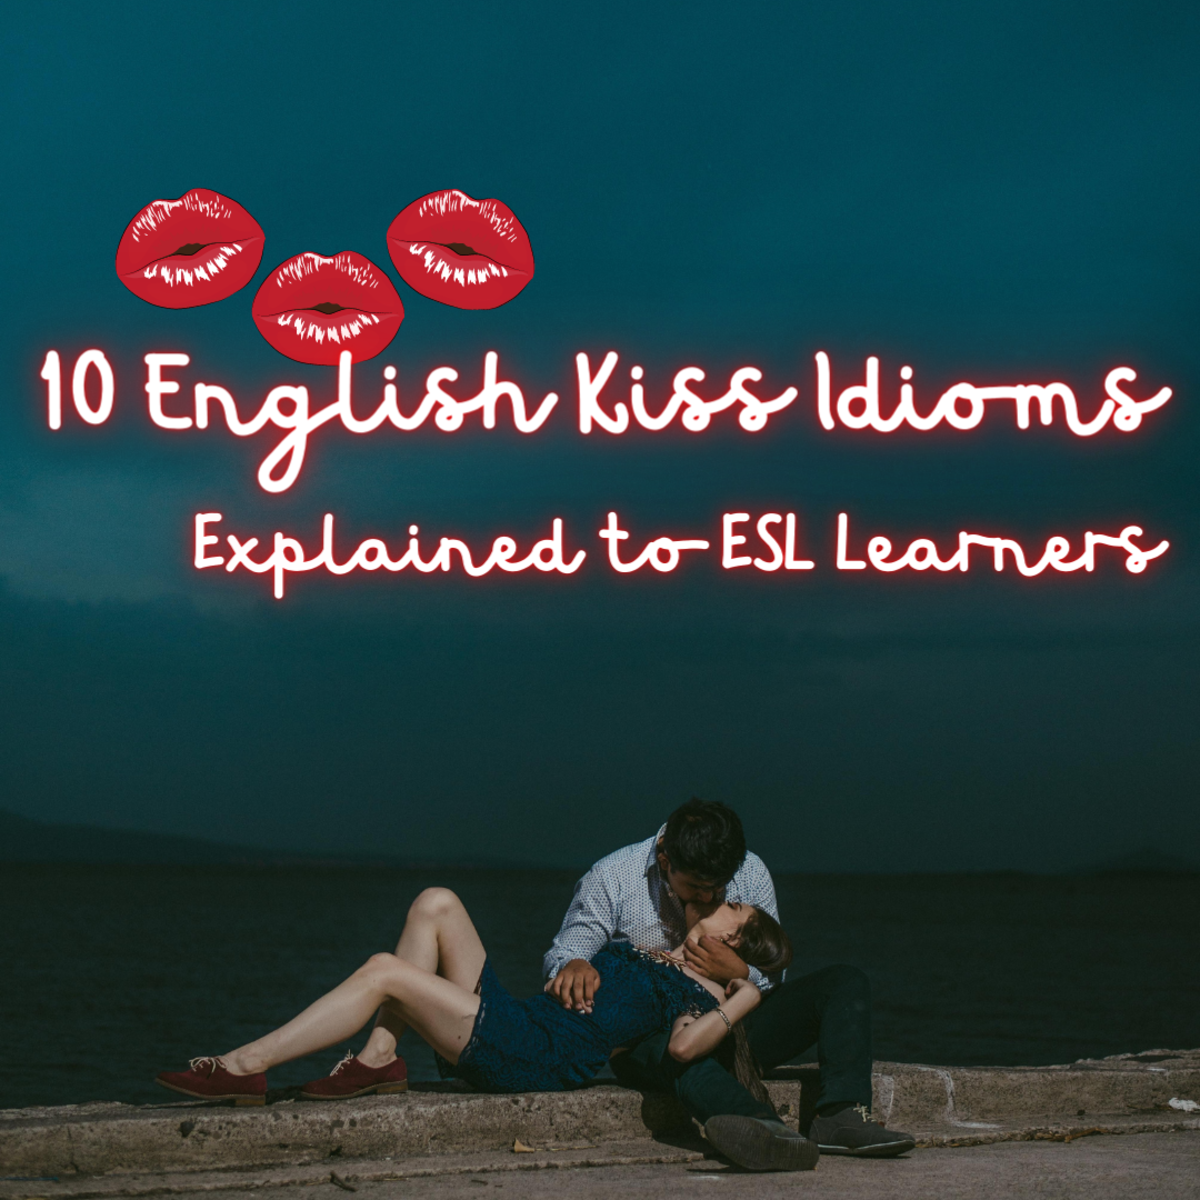 Read on to discover 10 common English kissing idioms. As an ESL student, these idioms will help you further understand conversational aspects of the English language.